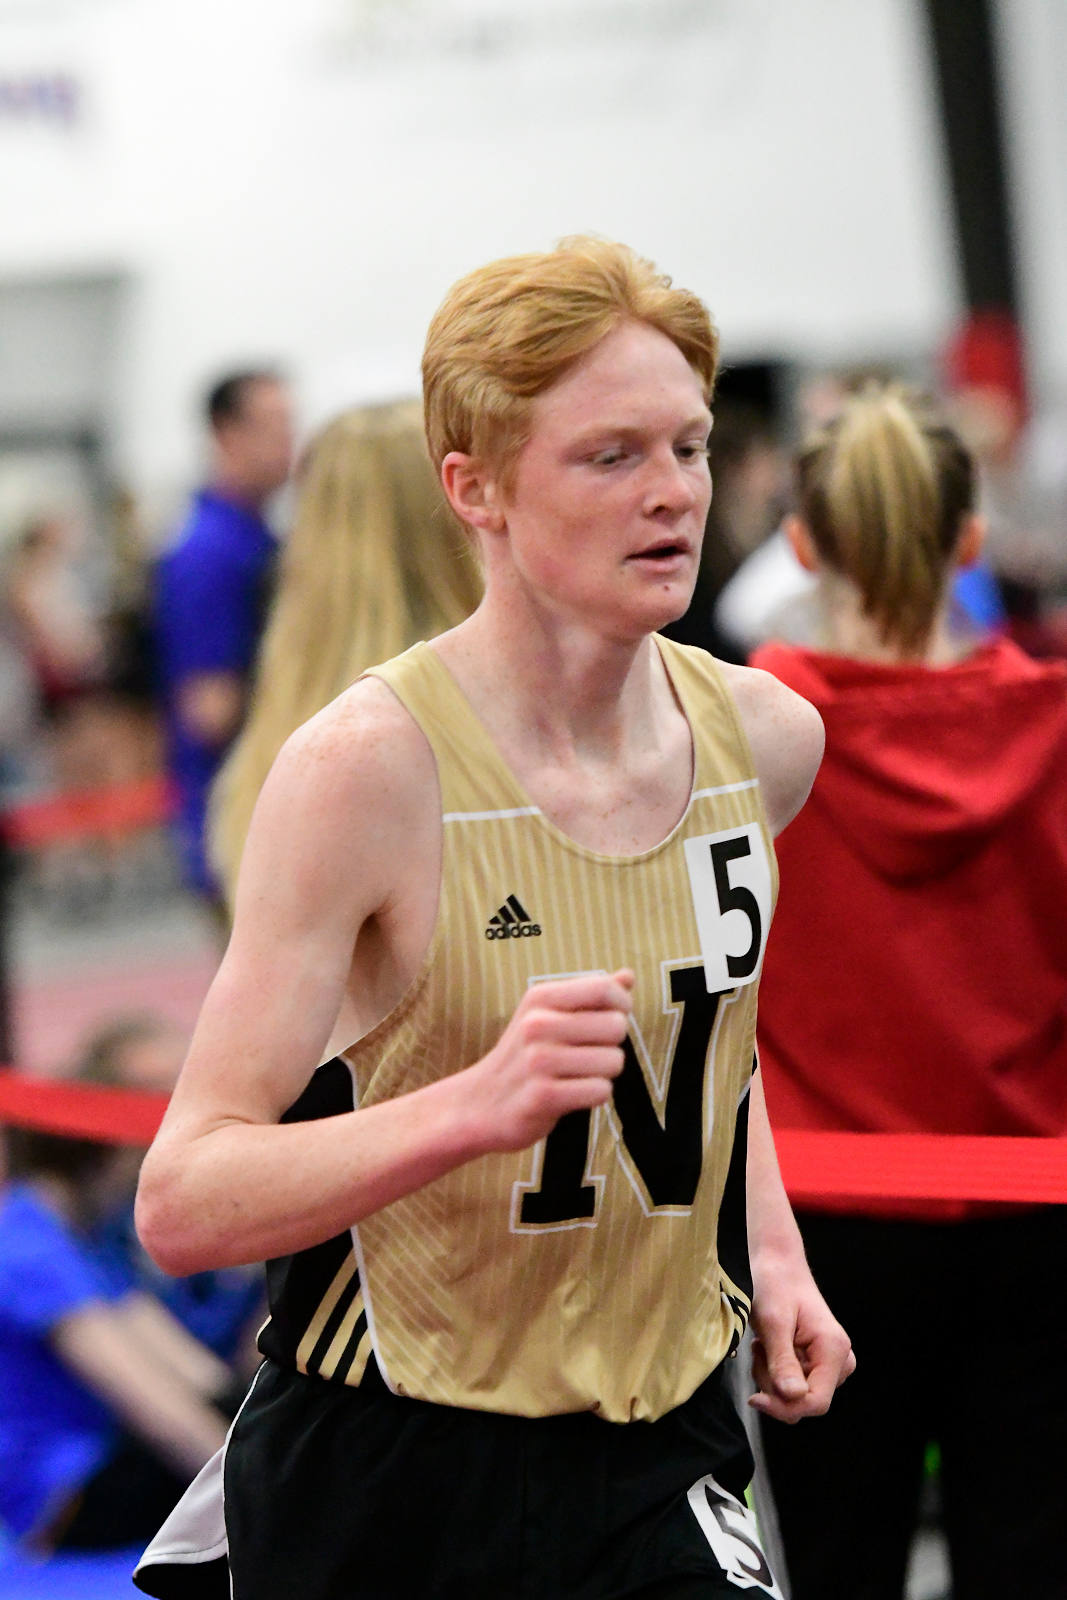 Hoosier State Relays County athletes taking their spots on qualifying